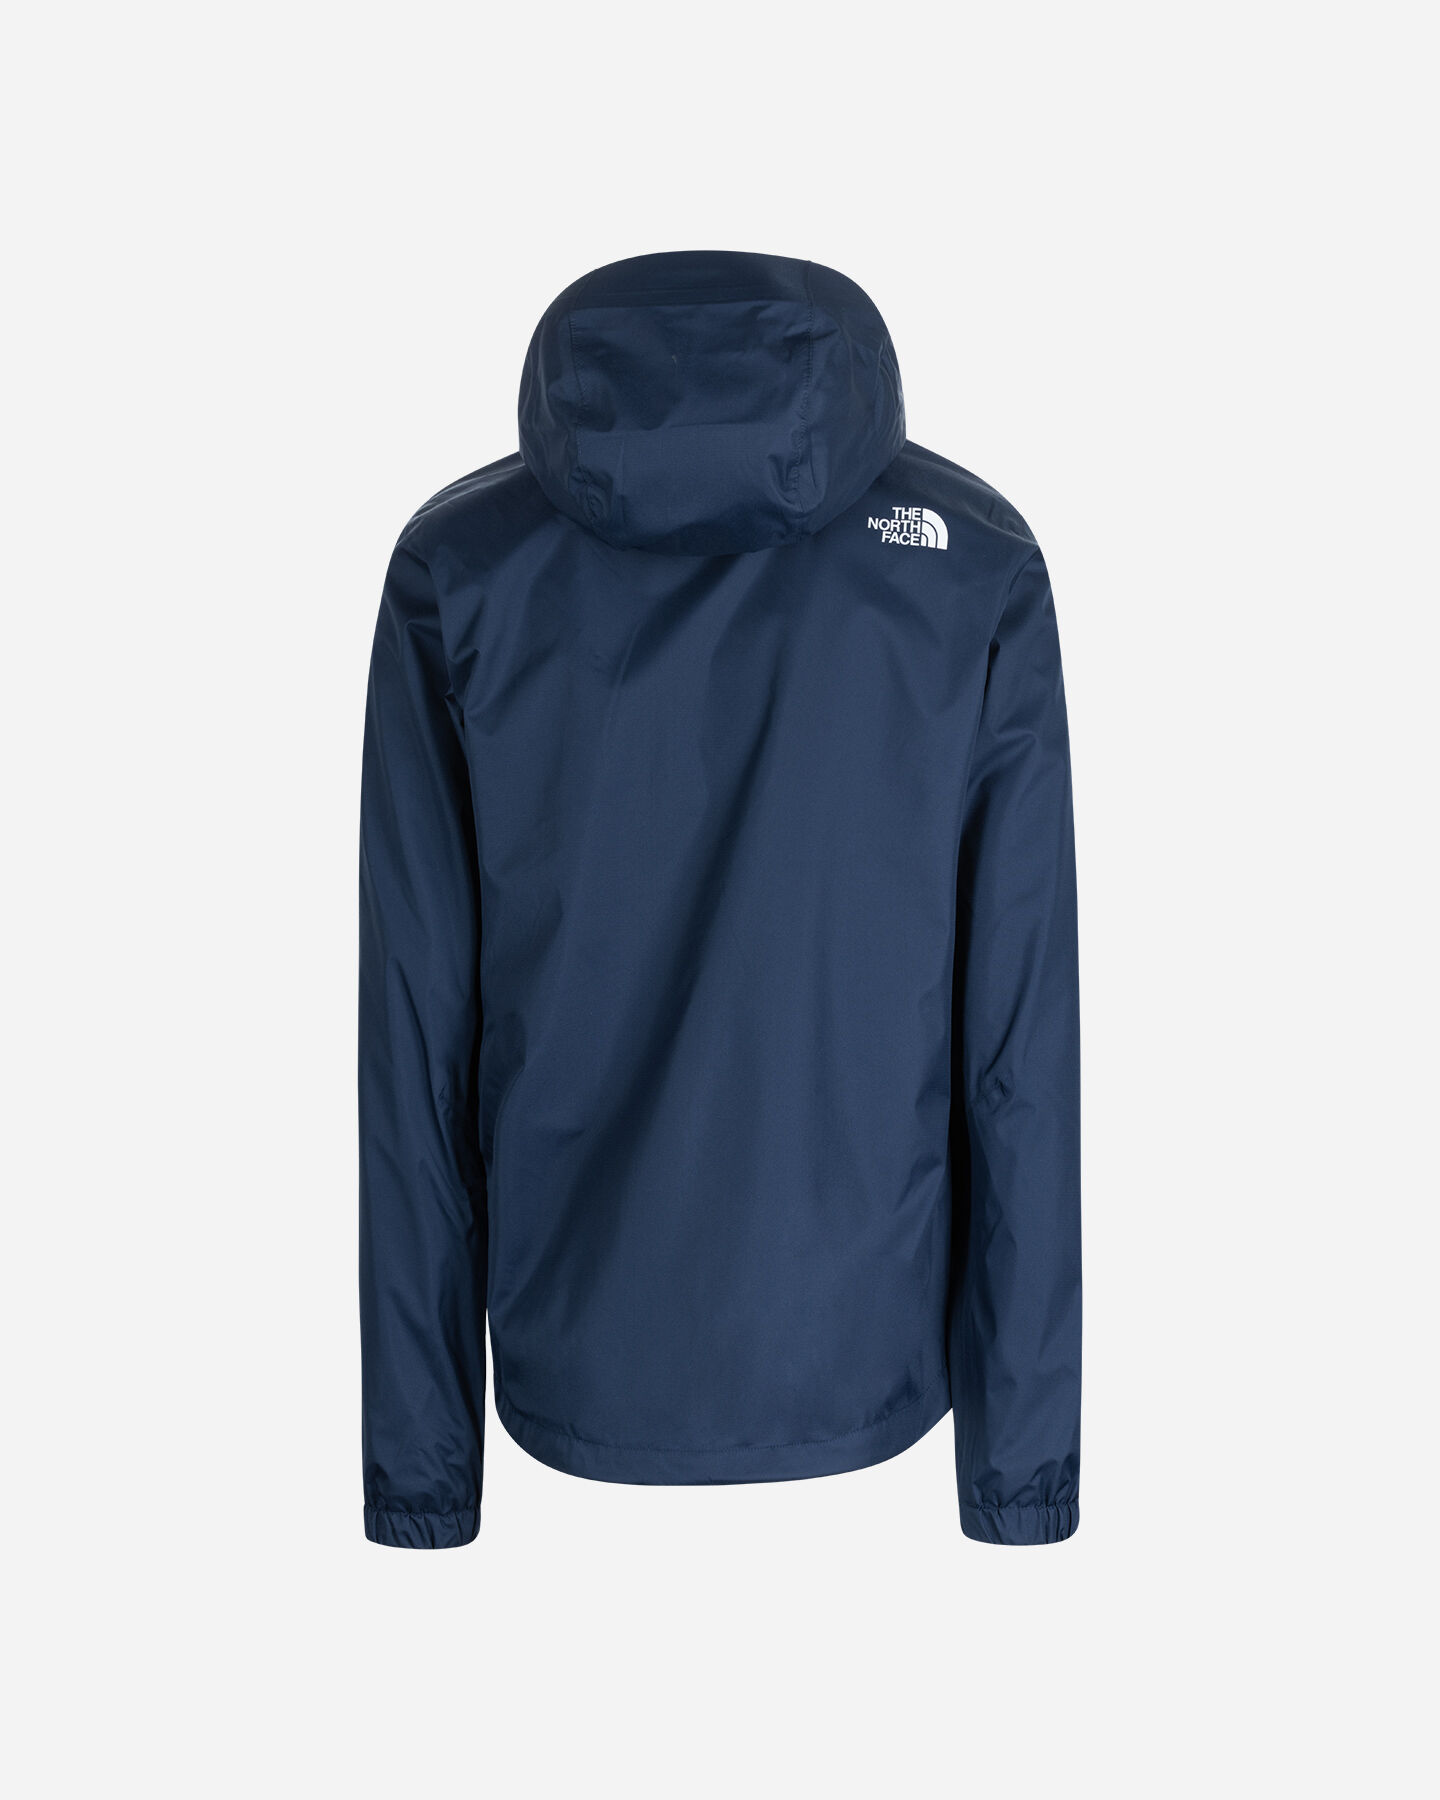  Giacca outdoor THE NORTH FACE SUMMIT M S5474014|8K2|XS scatto 1